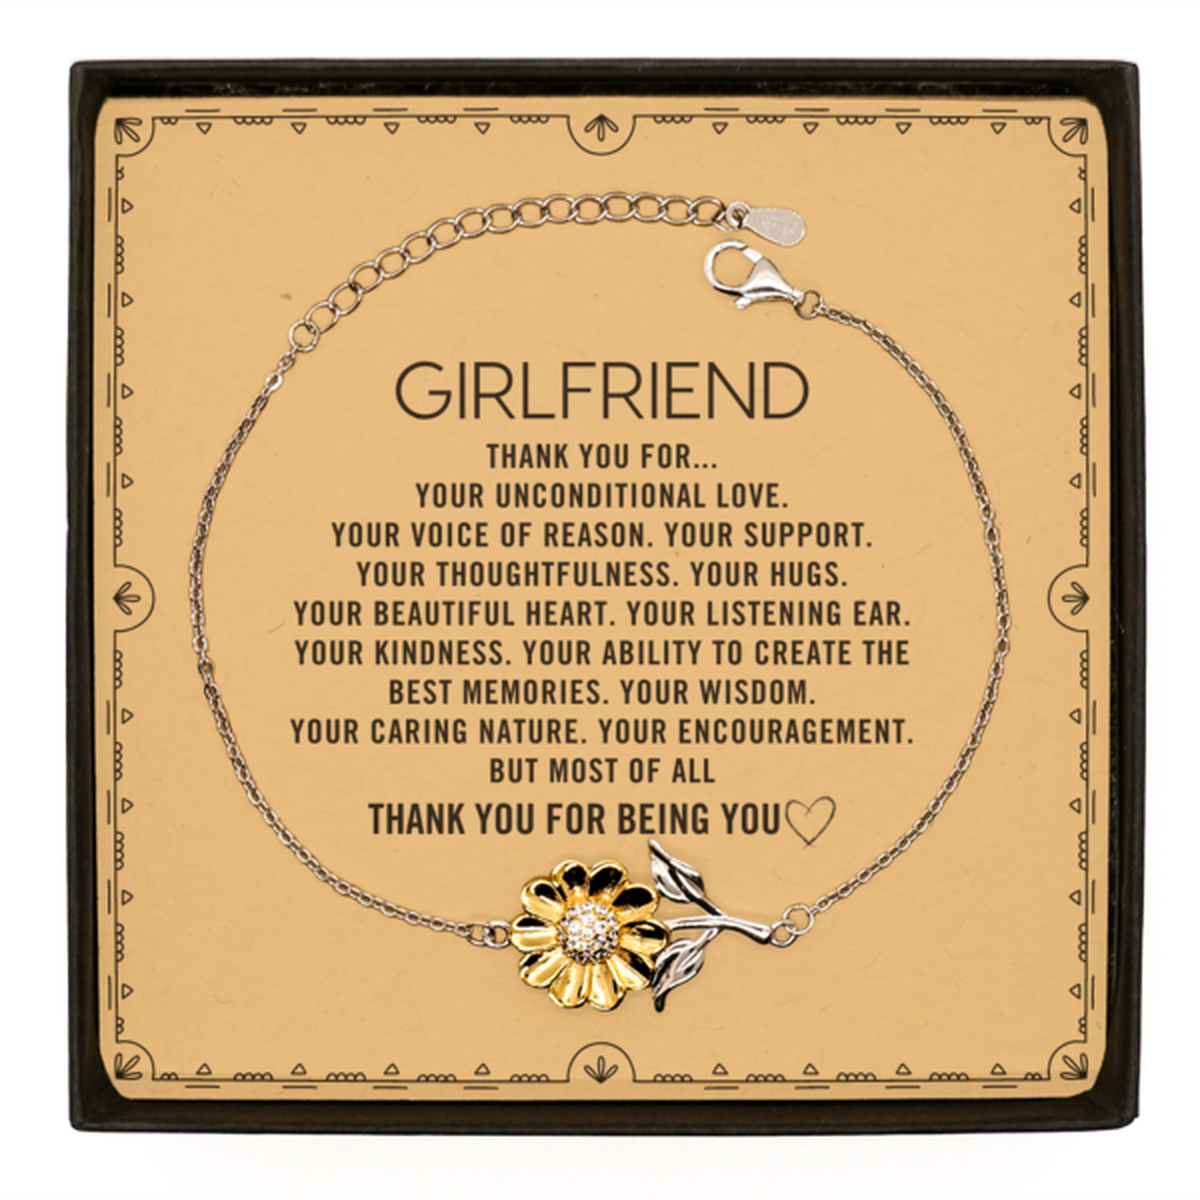 Girlfriend Sunflower Bracelet Custom, Message Card Gifts For Girlfriend Christmas Graduation Birthday Gifts for Men Women Girlfriend Thank you for Your unconditional love